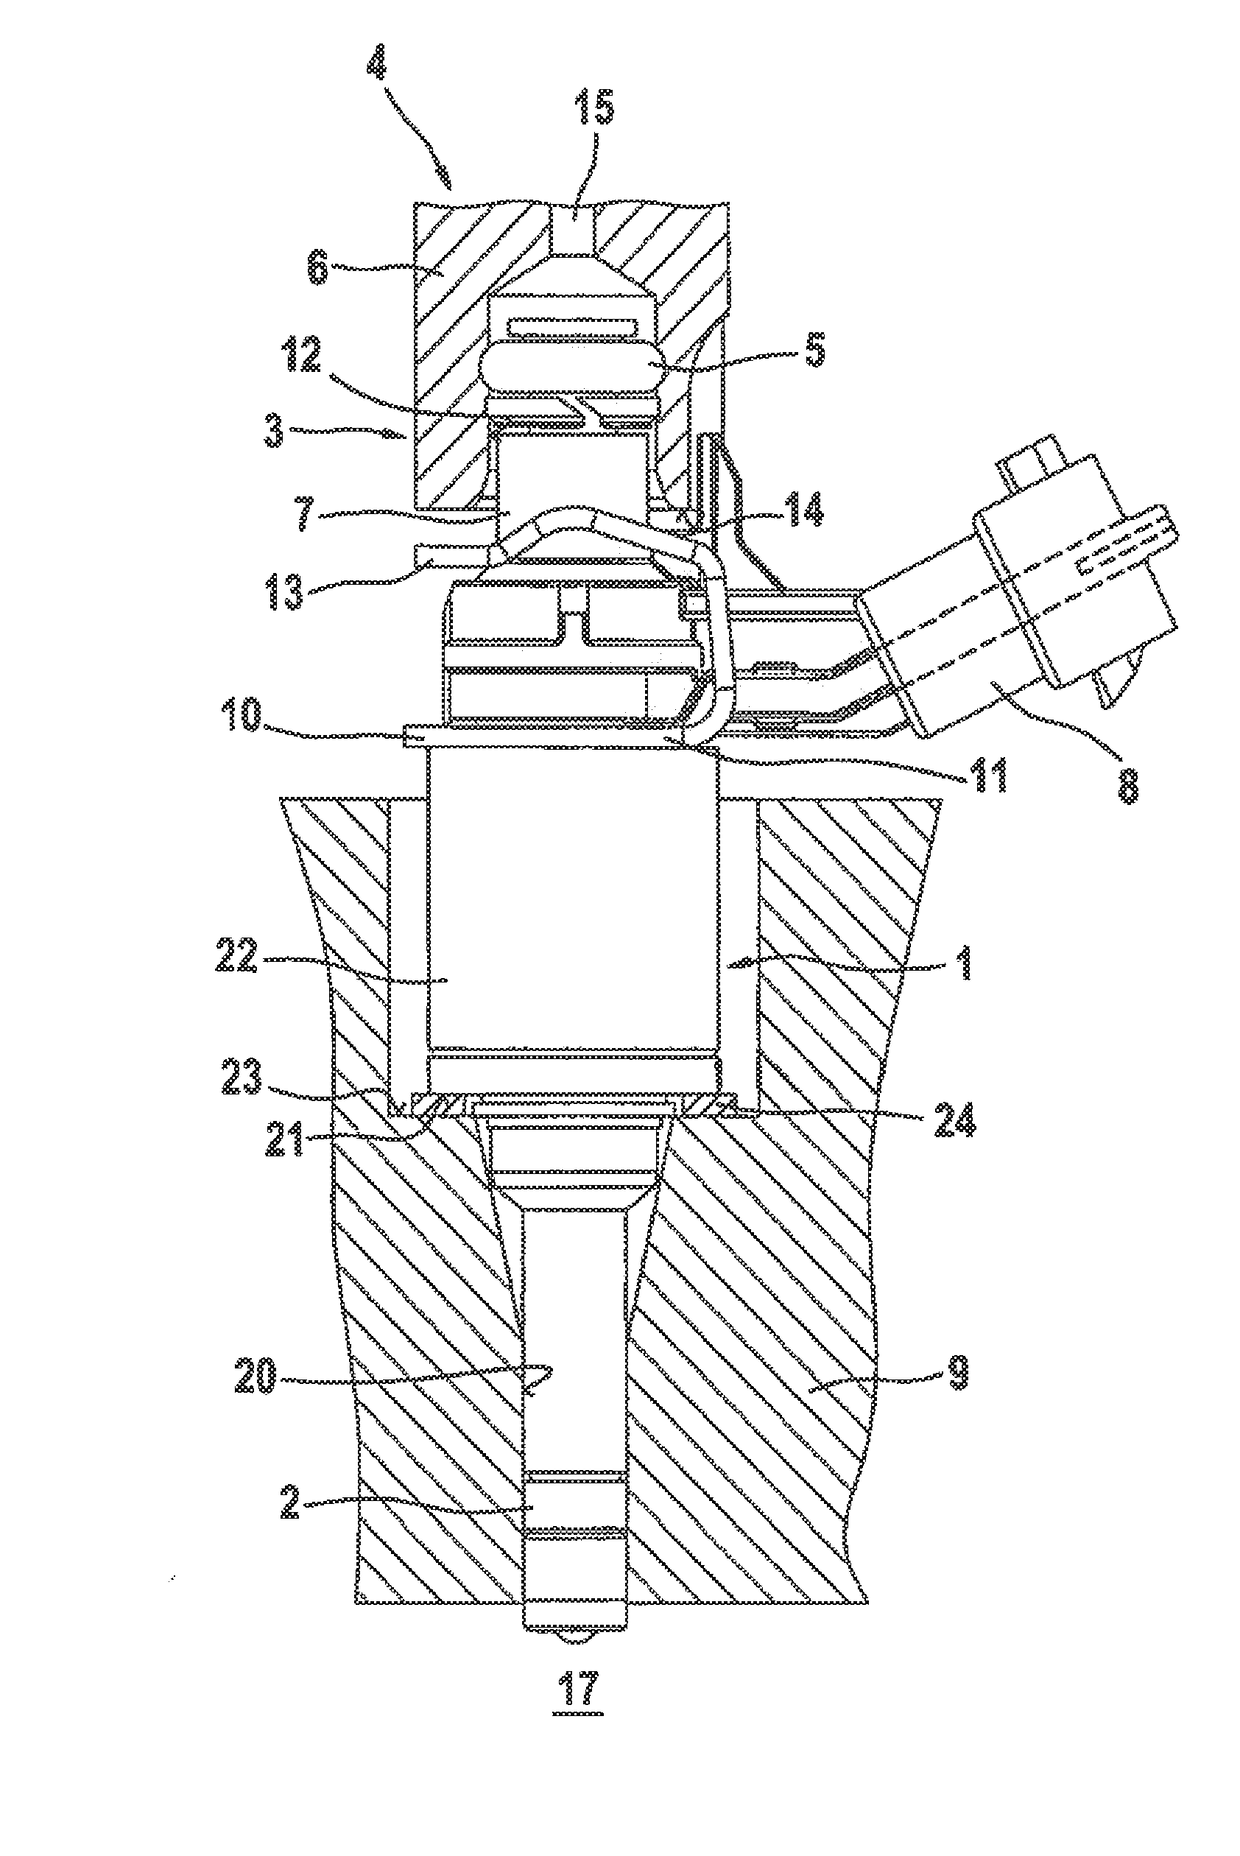 Decoupling element for a fuel injection device